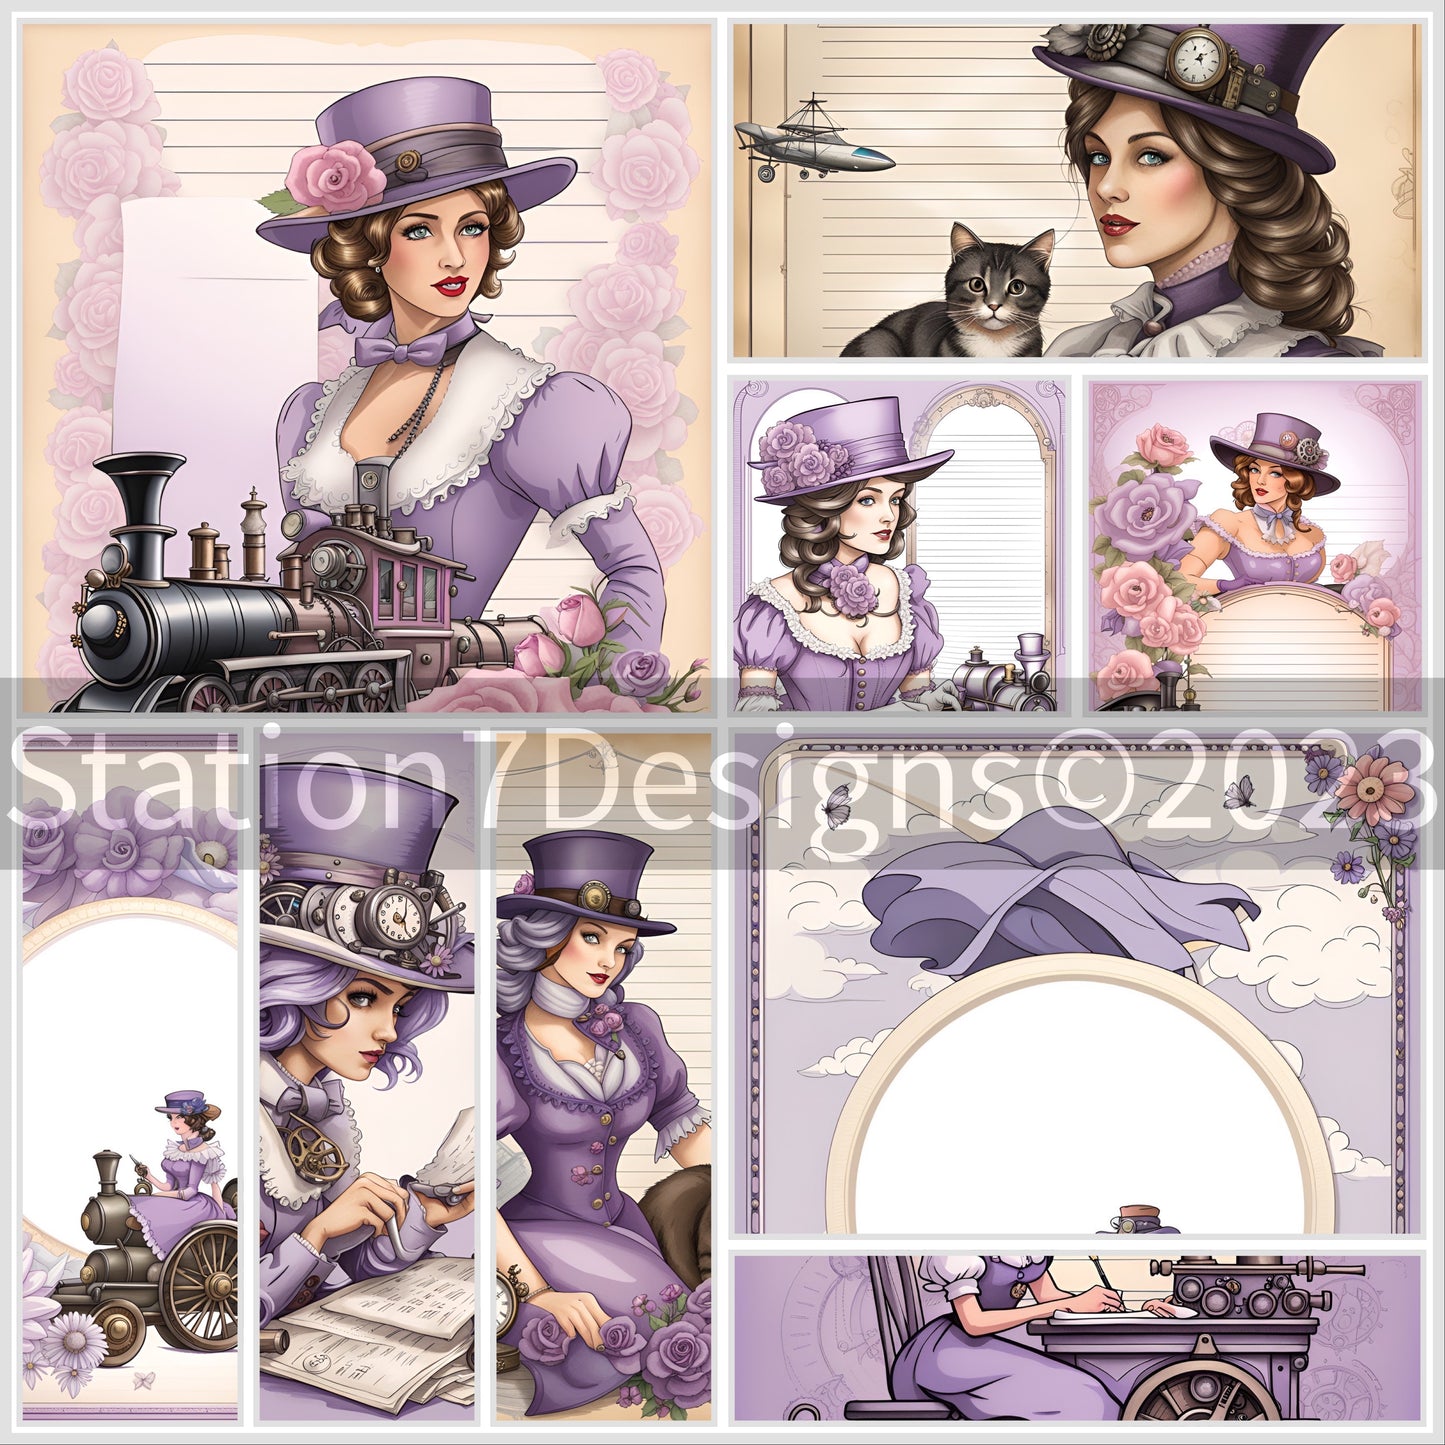 Women Of The Steam Age Series-Purple-Junk Journal Stationery Paper Set of 30 Portrait Prints On Recycled Linen Paper Or Card Stock